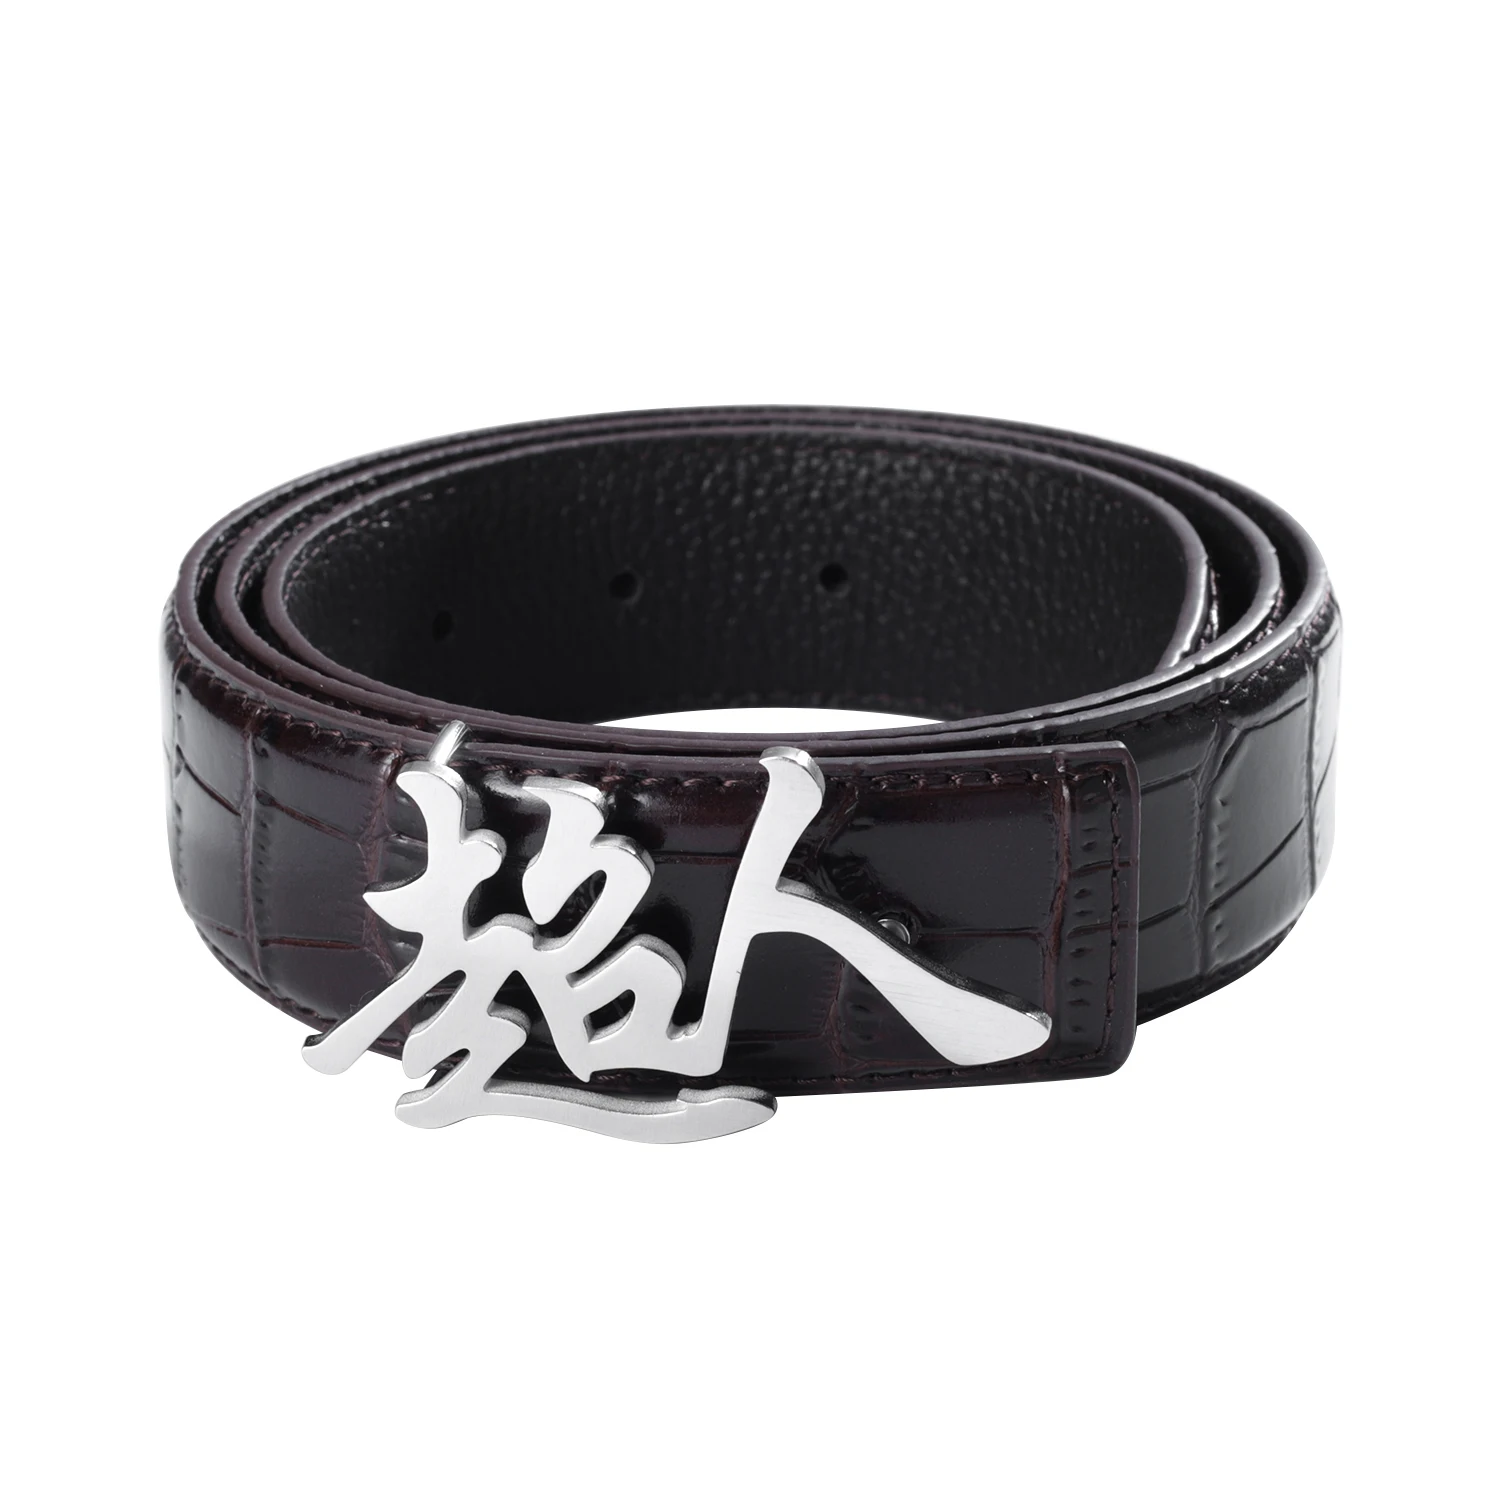 Customized Chinese Text Belt Buckle High Quality Crocodile Pattern Pu Leather Belt Men's Jeans Trousers Personalized Accessories